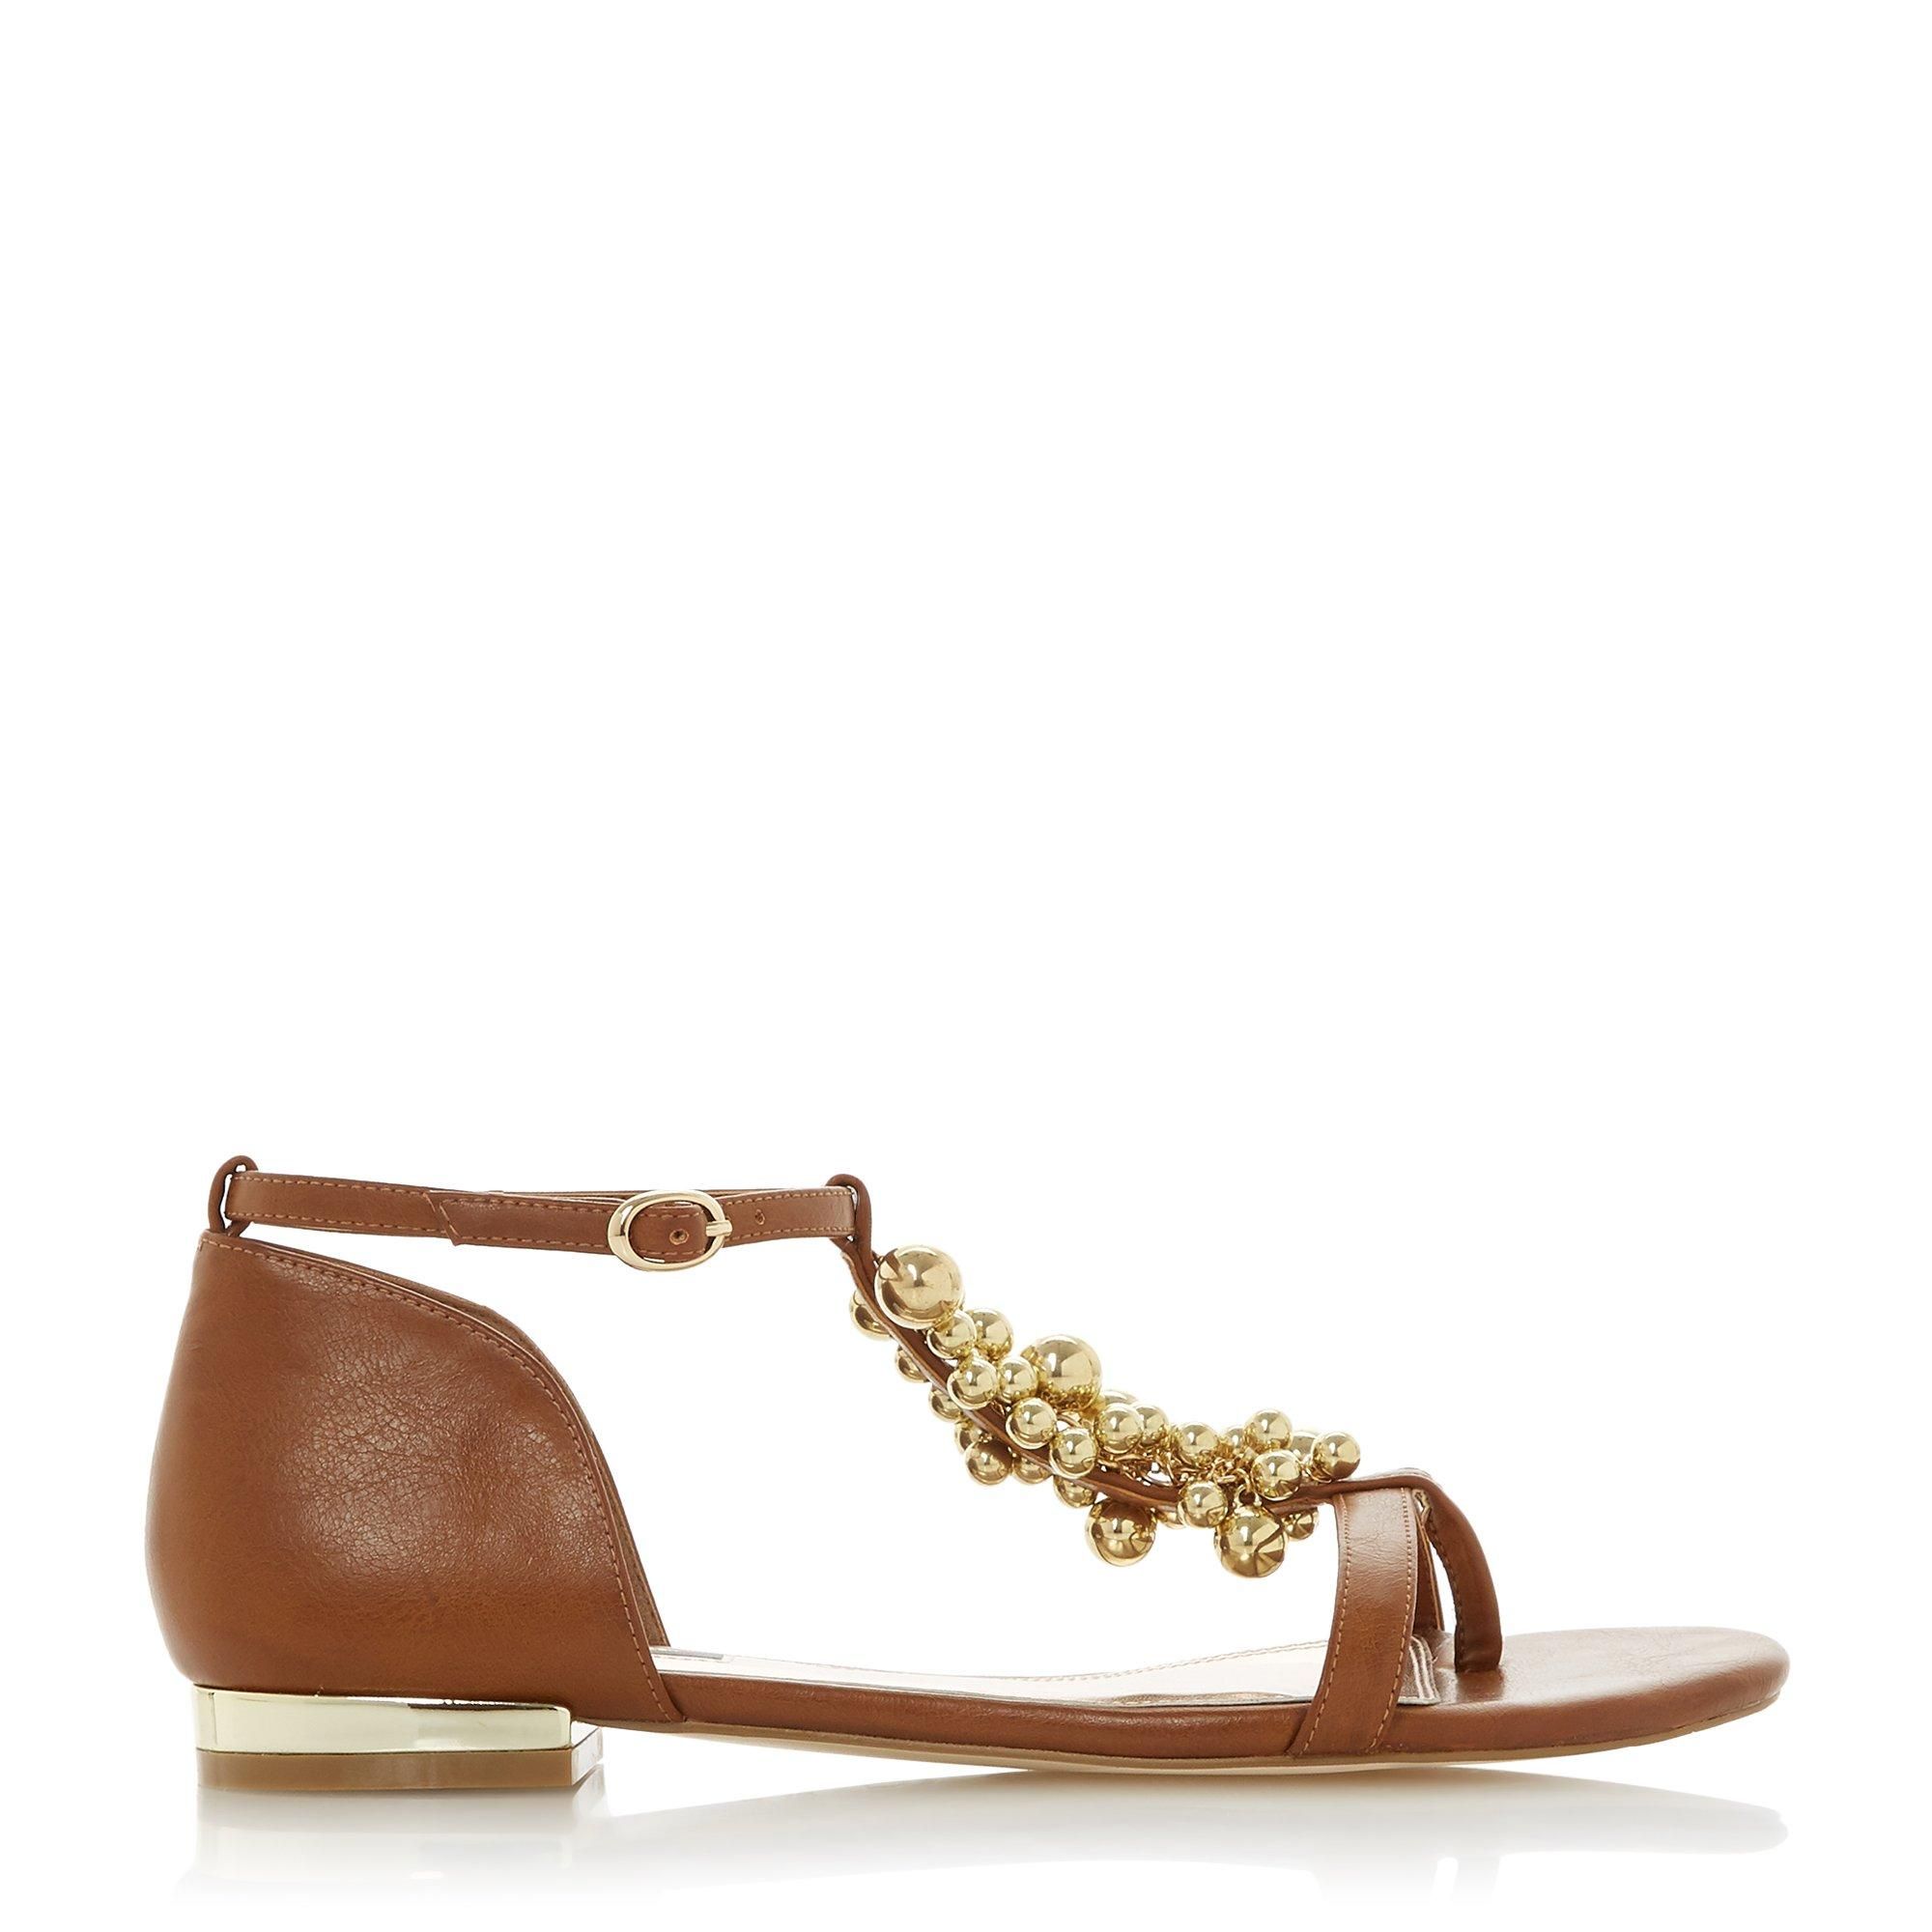 Make a summer style statement with the Dune London Hobart 2 sandal. Showcasing stylish gold-toned ball embellishments on the T-Bar strap. It's complete with a metal trim on the heel and a secure buckle fastening.